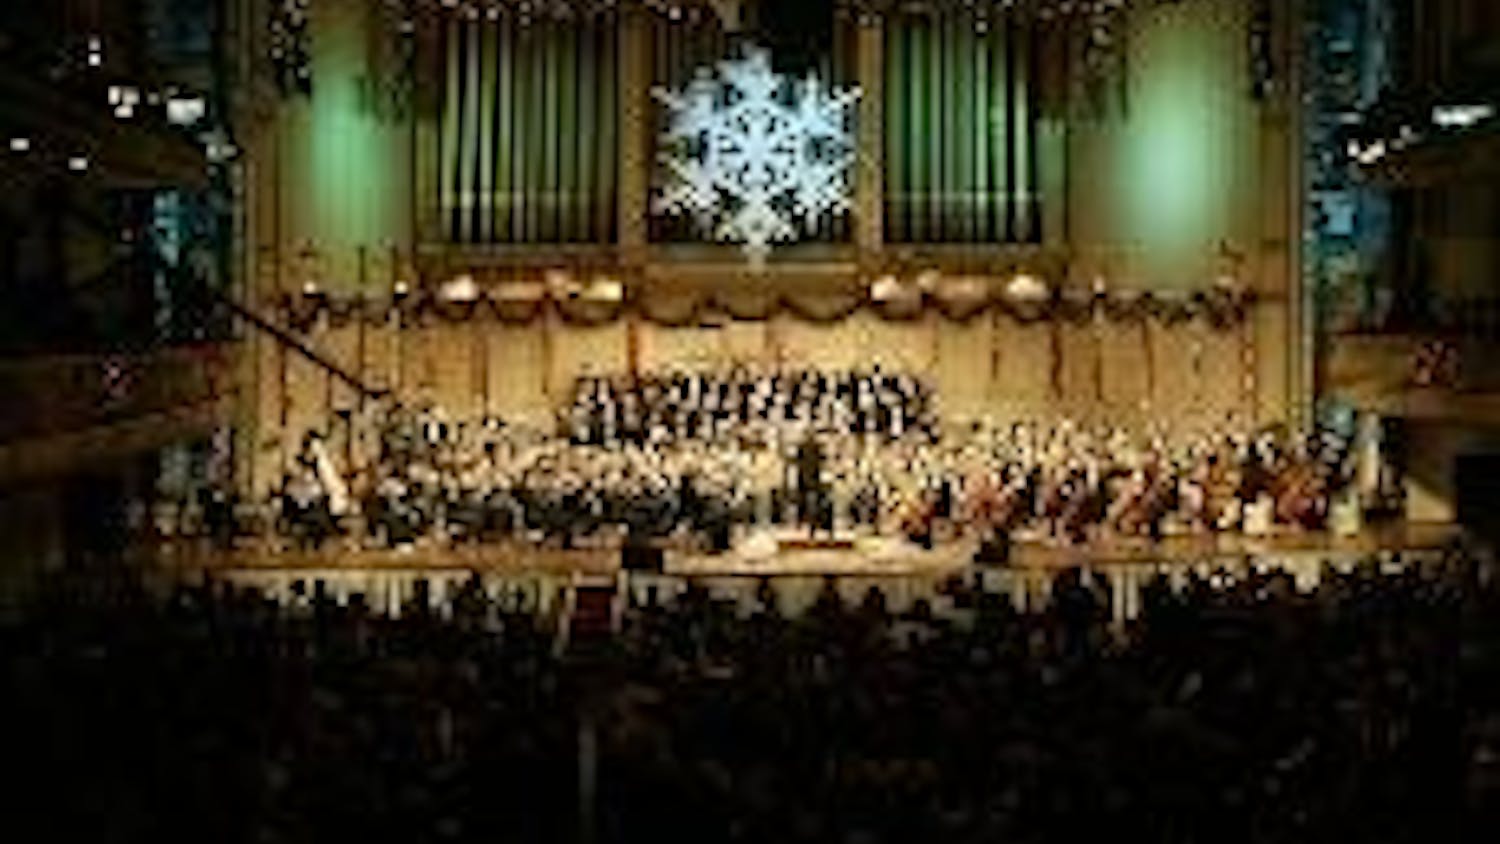 The Boston Pops performance mixed holiday favorites with classical standouts.